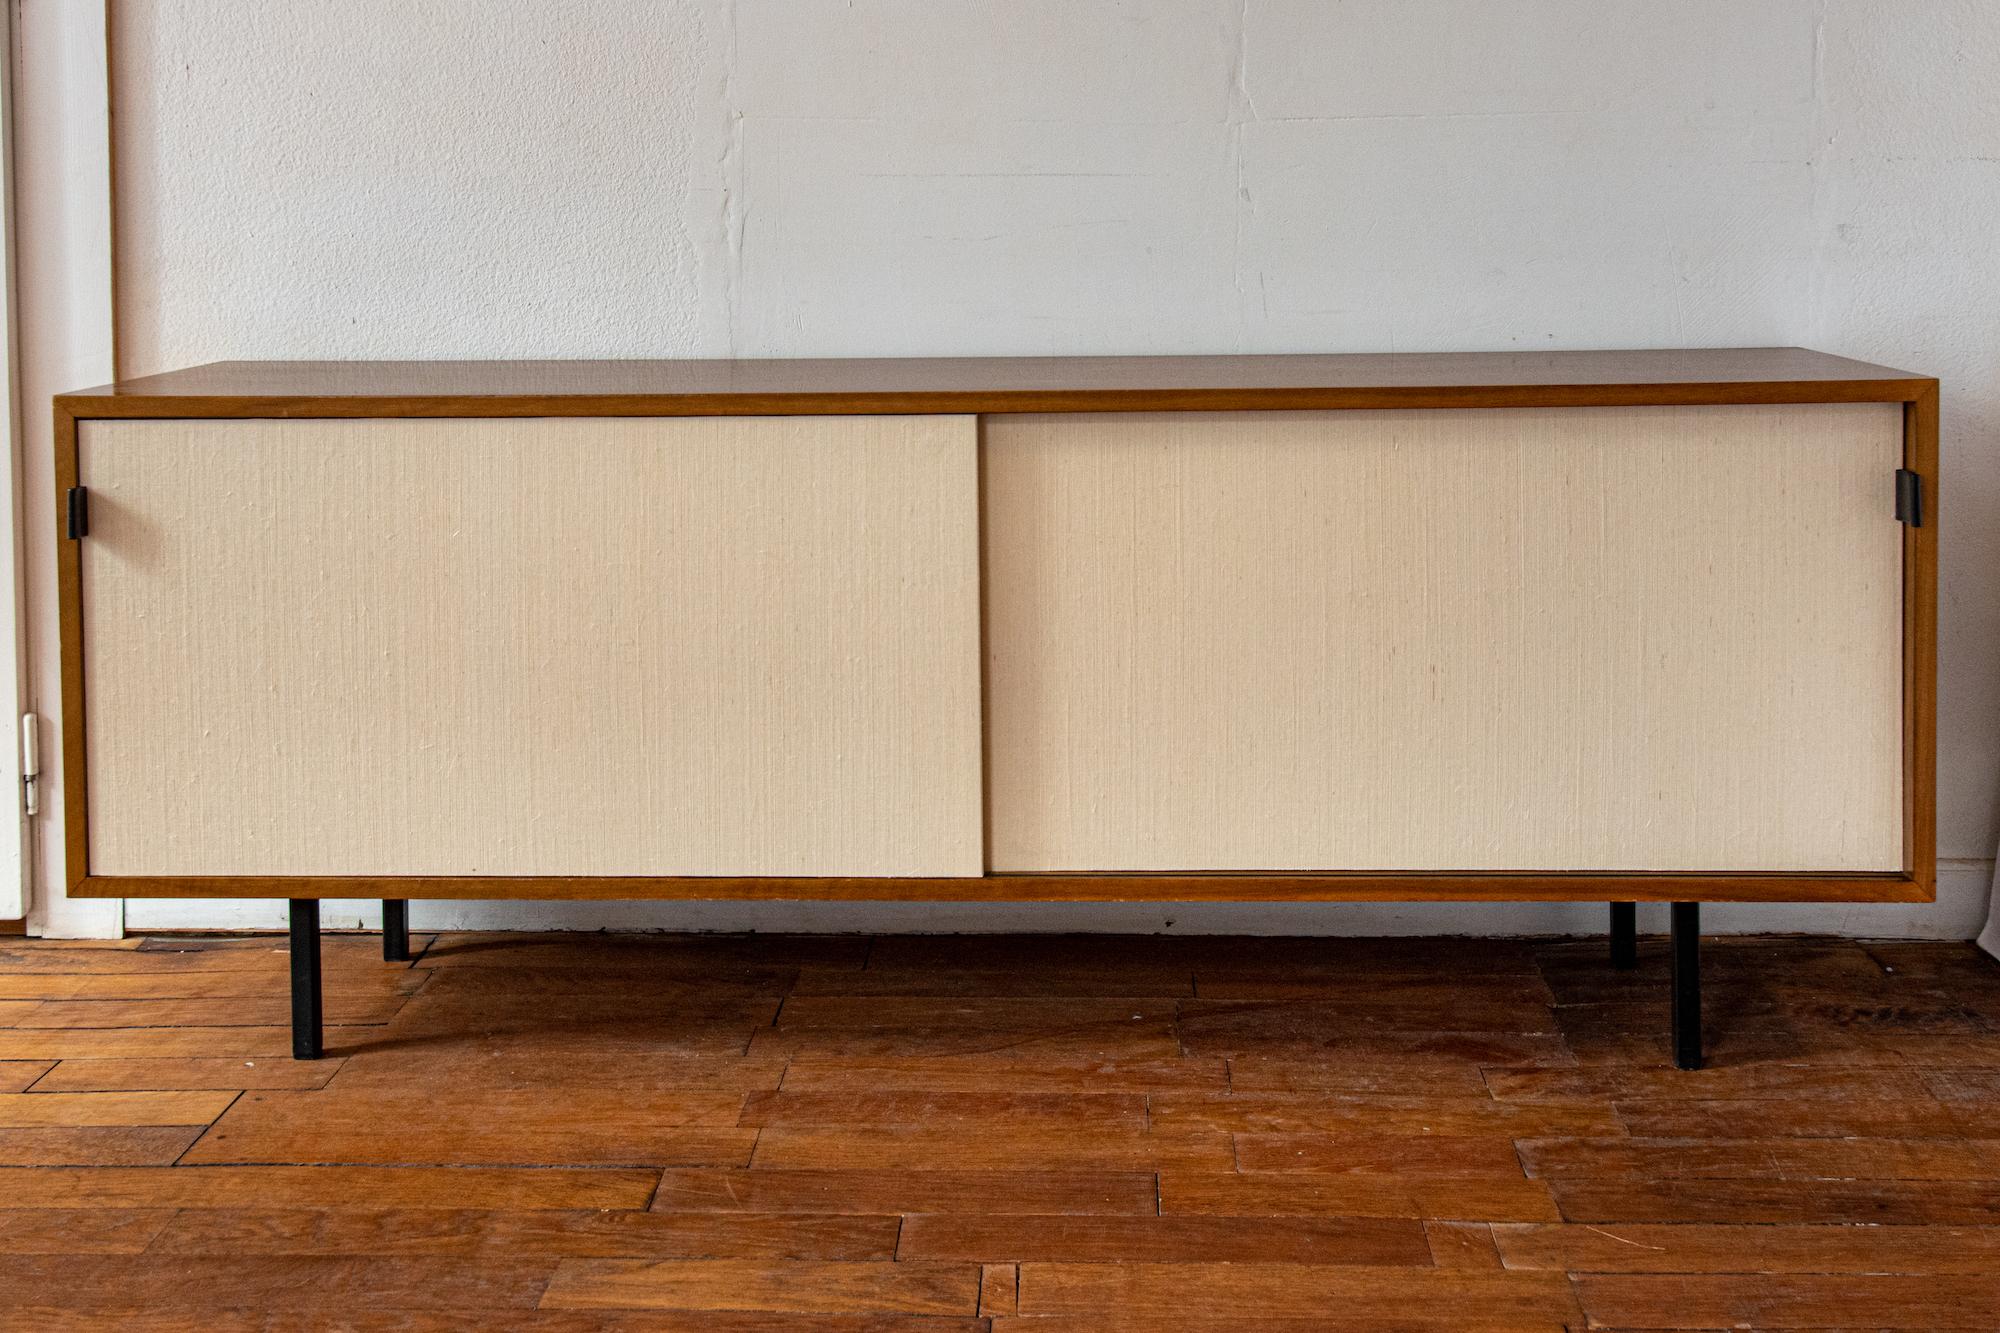 Neat and rare Florence Knoll sideboard, Made in Switzerland by Wohnbedarf for Knoll International, circa 1968. 
Walnut wood,  sliding doors with seagrass, leather handles, black metal legs.
Nice patina, very well preserved original condition.